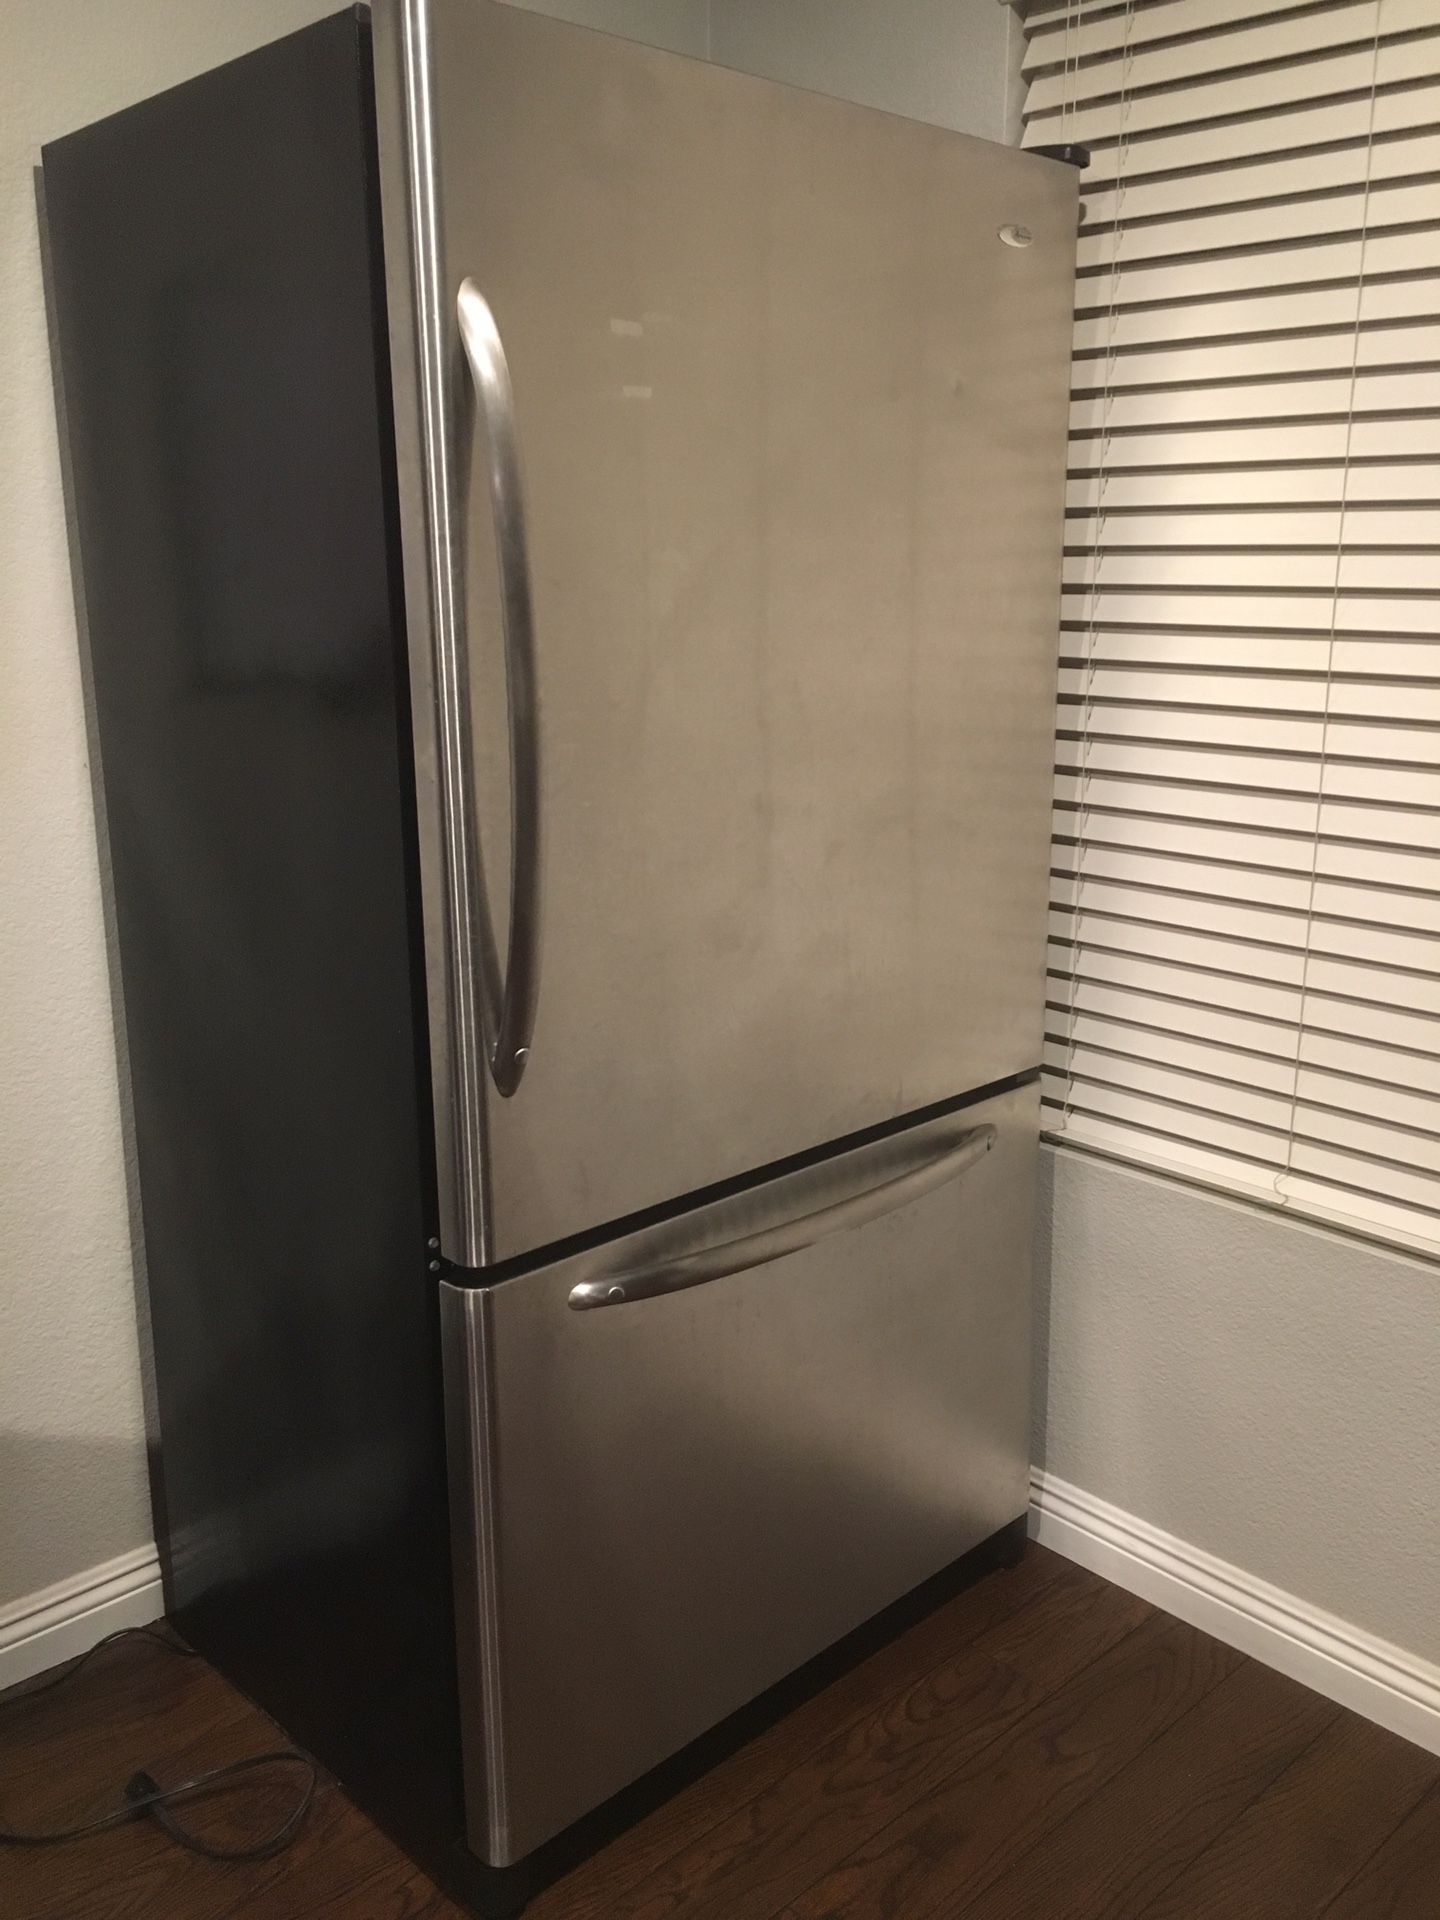 Amana Stainless Steel Coulter Depth Refrigerator